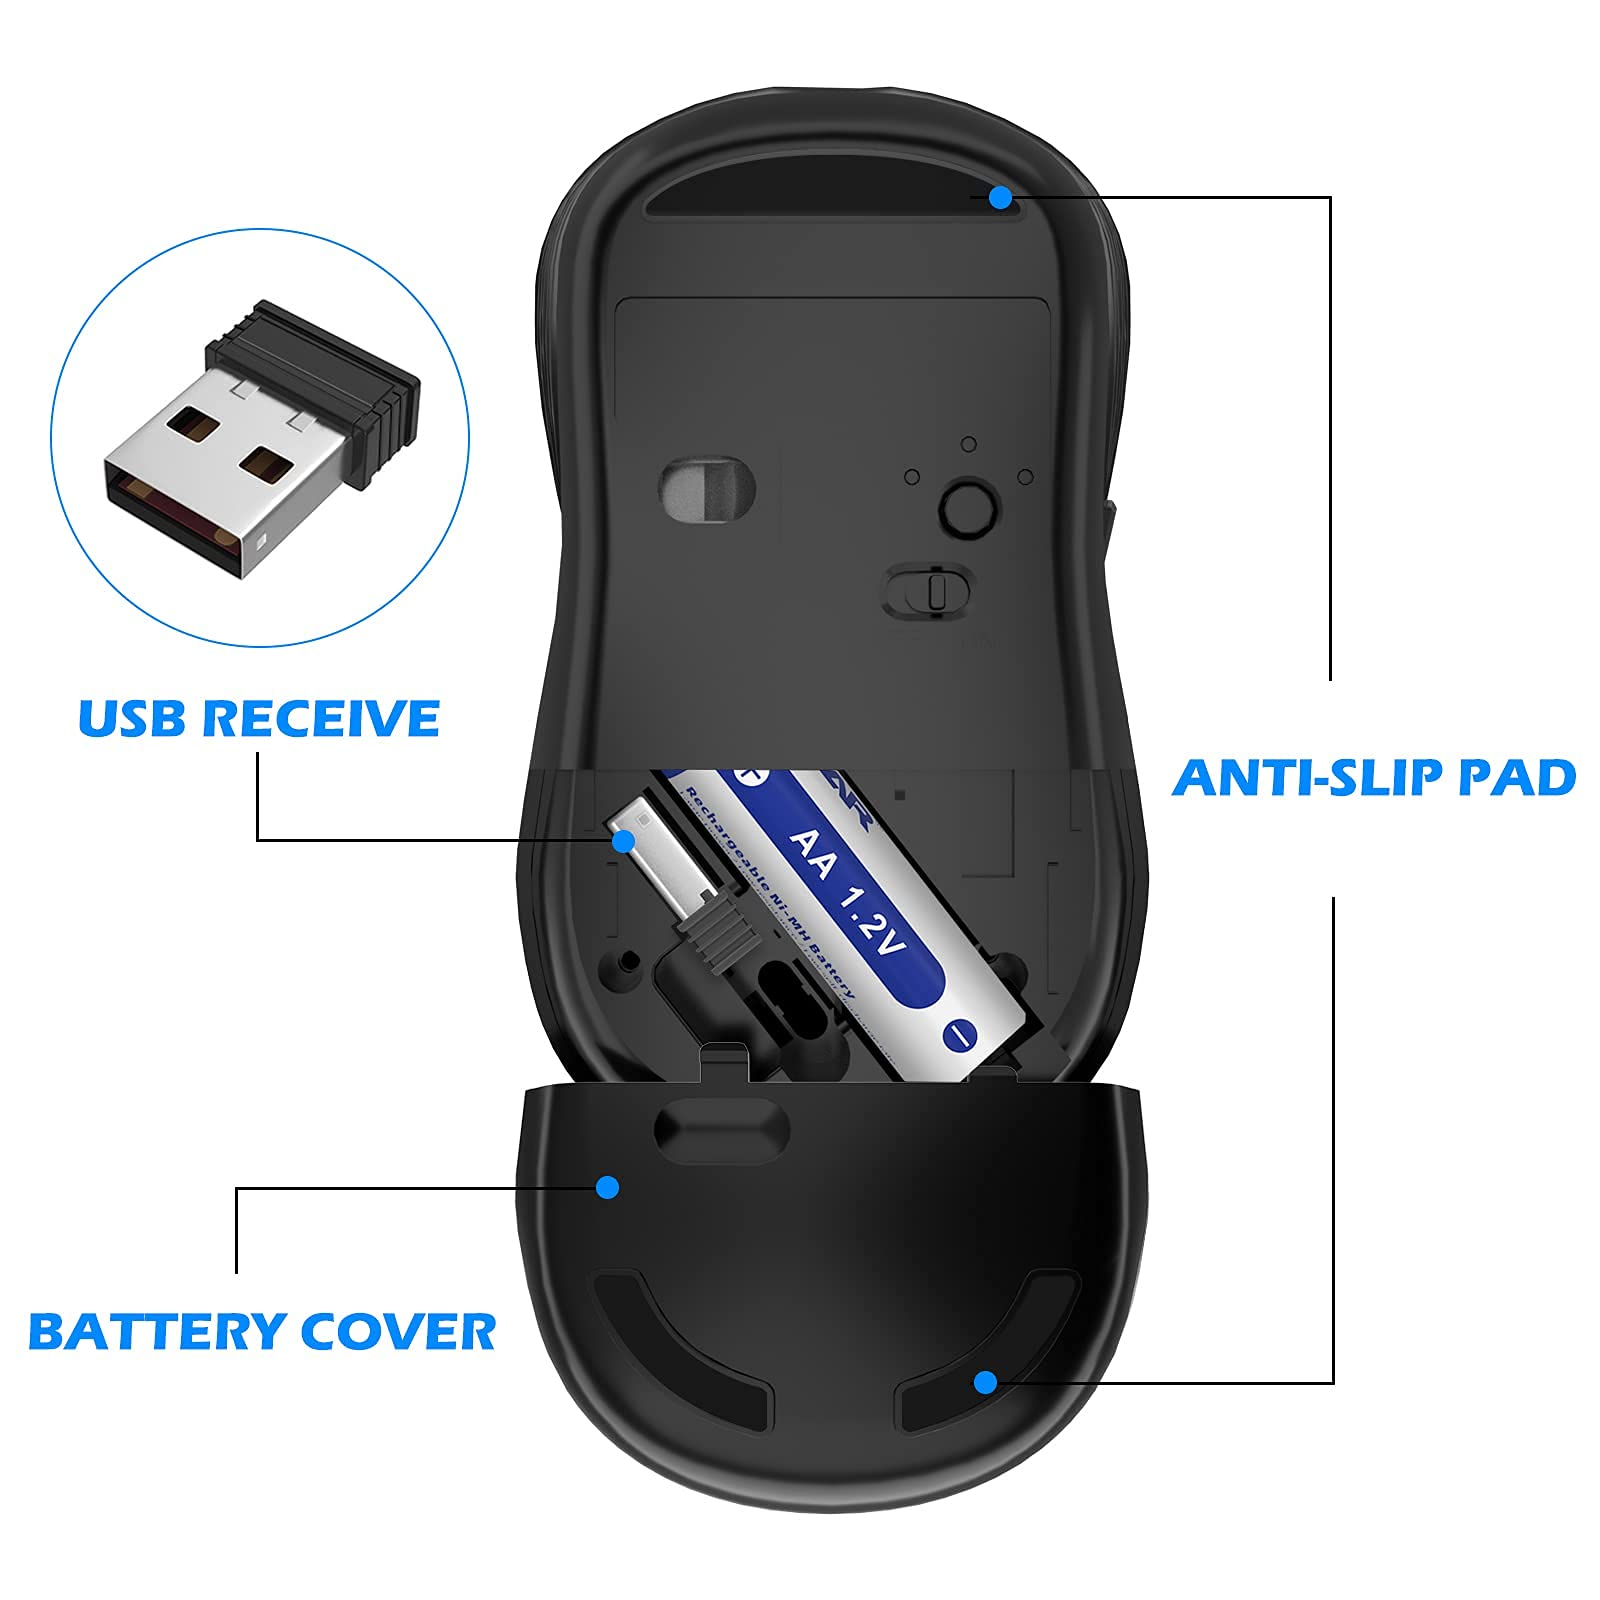 TNBIU Wireless Mouse, 2.4G 4000DPI Ergonomics Cordless Mouse with USB Receiver, Finger Rest, 5 Adjustable DPI Levels, Mobile USB Mice for Chromebook Notebook MacBook Laptop Computer